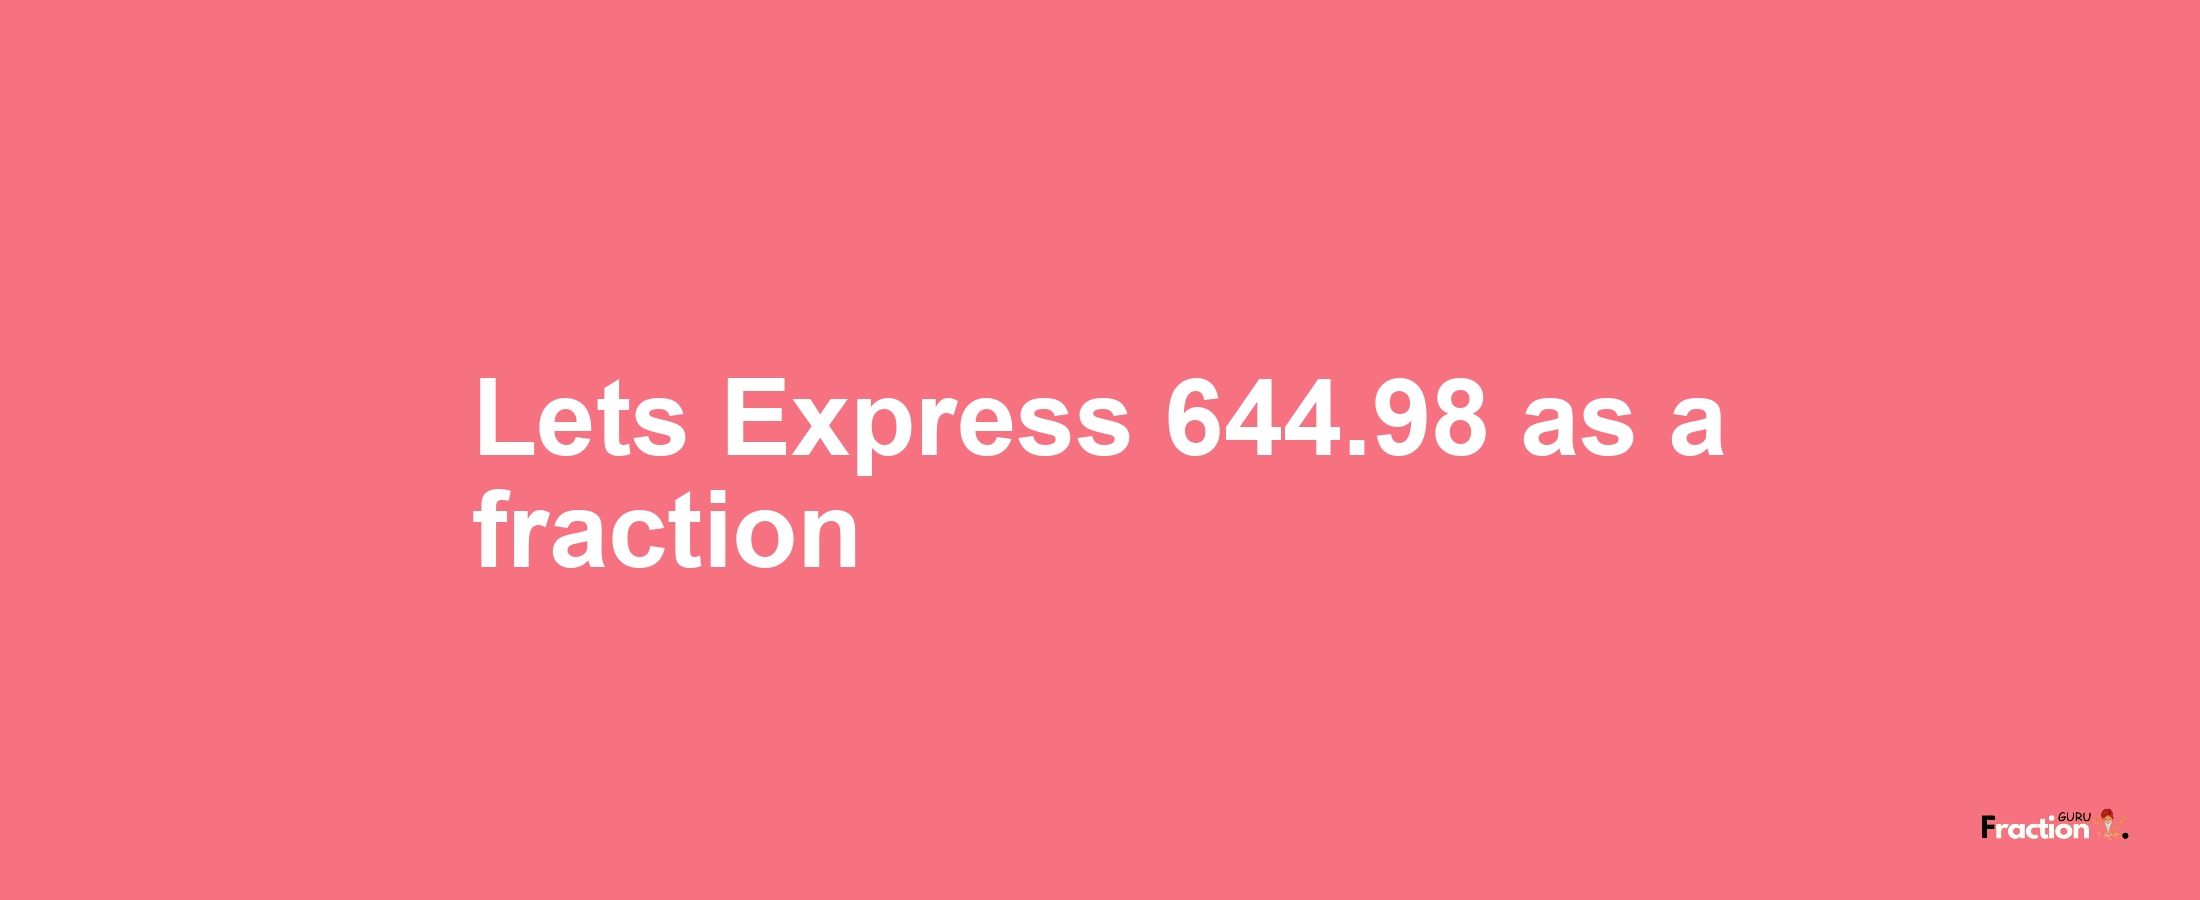 Lets Express 644.98 as afraction